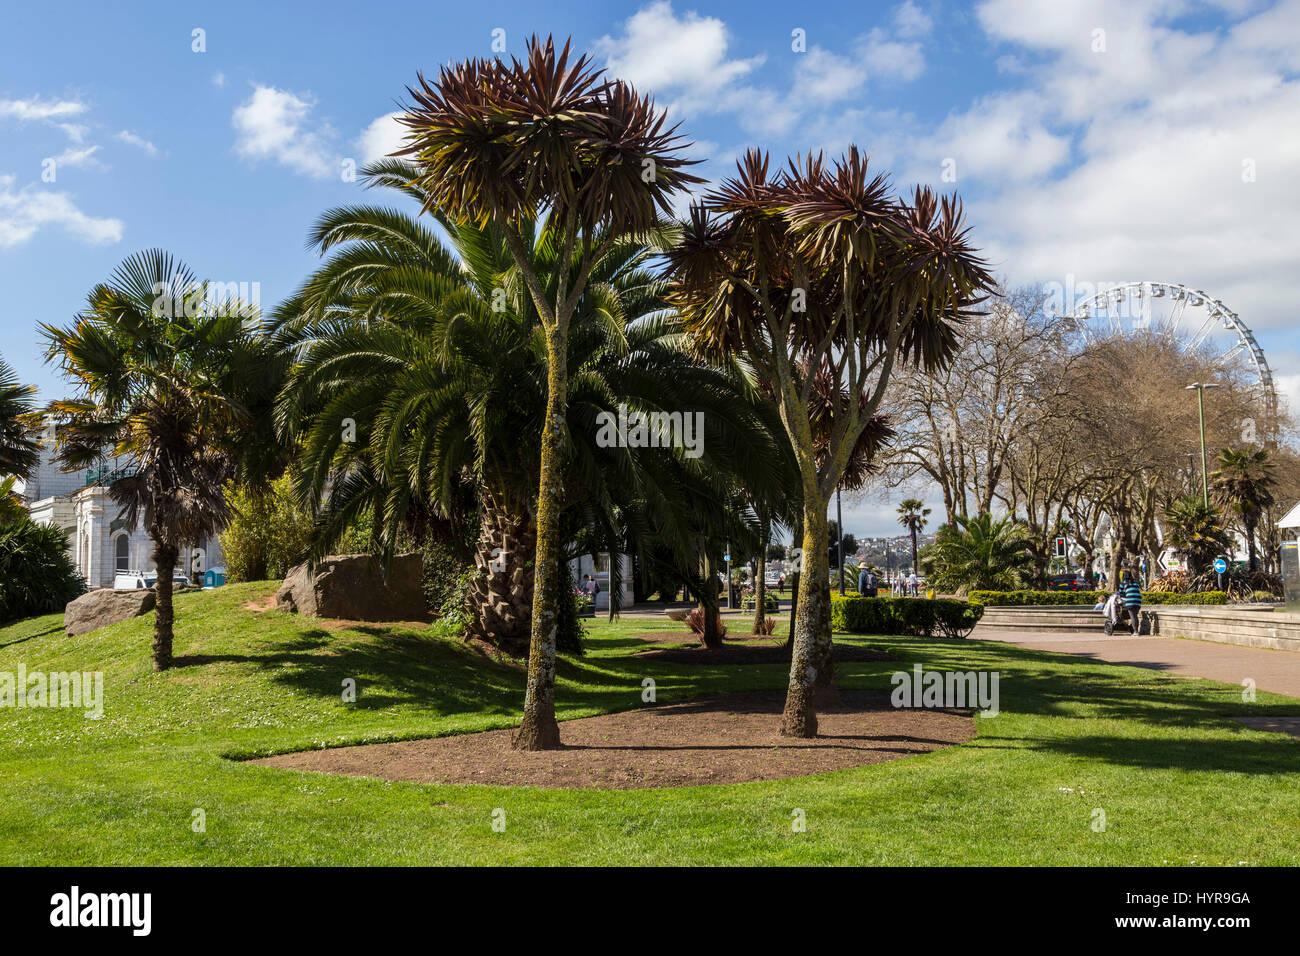 The English Riviera Wheel viewed through cordyline australis trees and other 'palm trees' in Torquay. Stock Photo